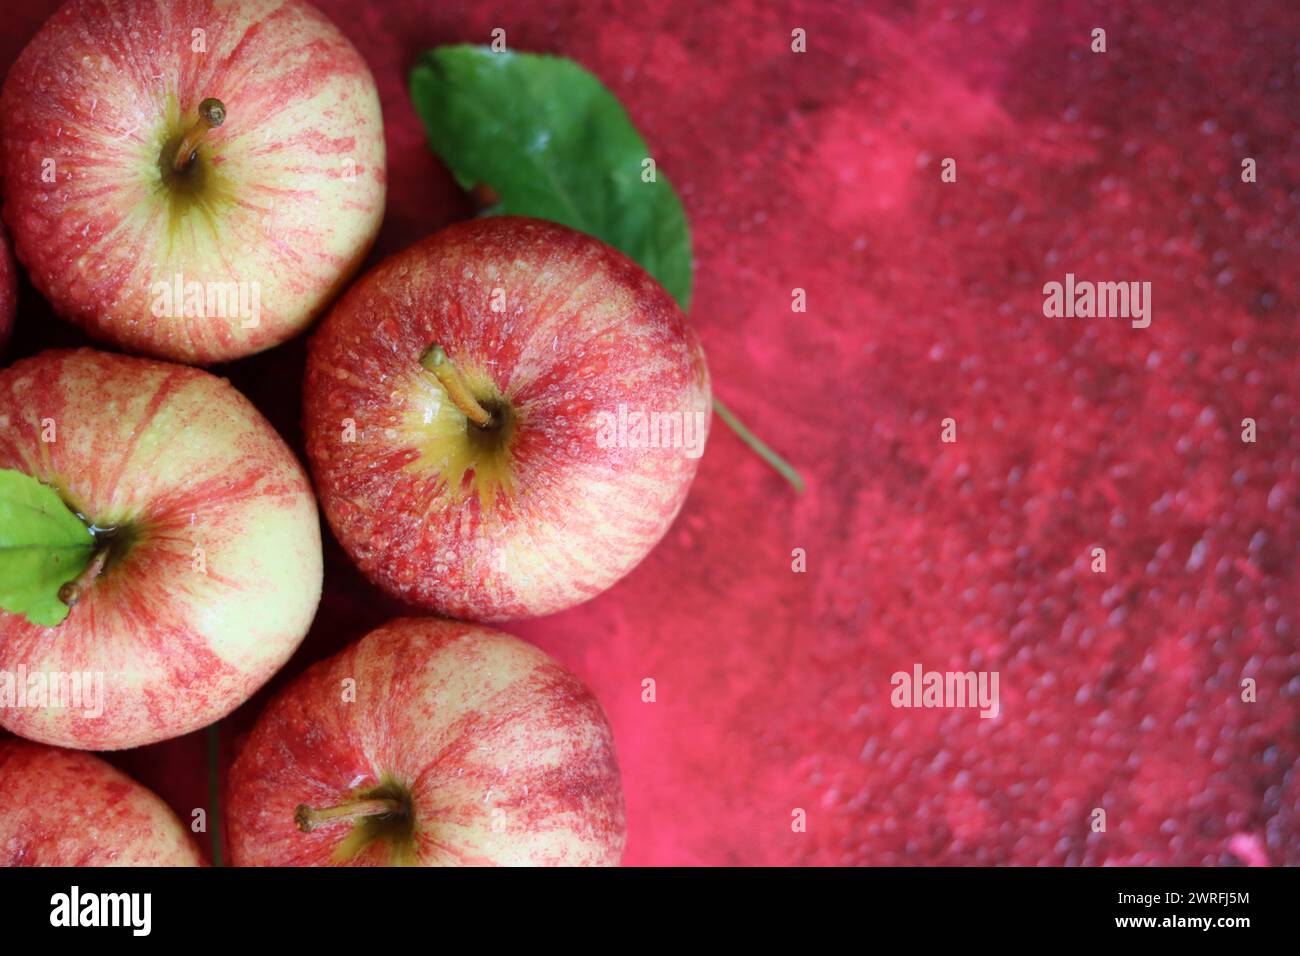 Red apples with leaves on red background. Top view, flat lay Stock Photo